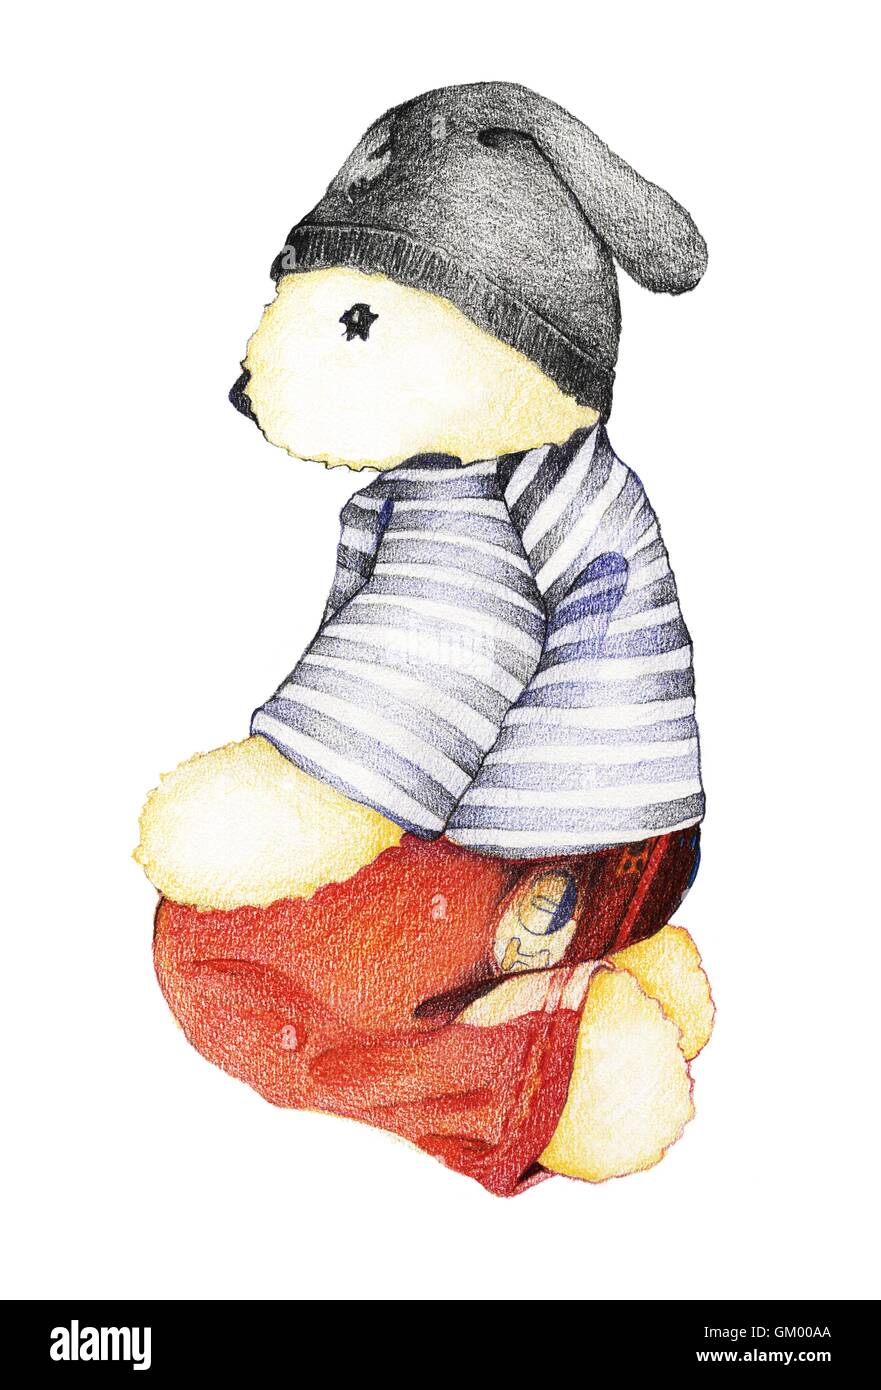 Hand Drawn Side View of Cute Teddy Bear in Striped Sailor Shirt with Red  Pants and Knitted Hat Sitting Down on Floor Isolated on Stock Photo - Alamy